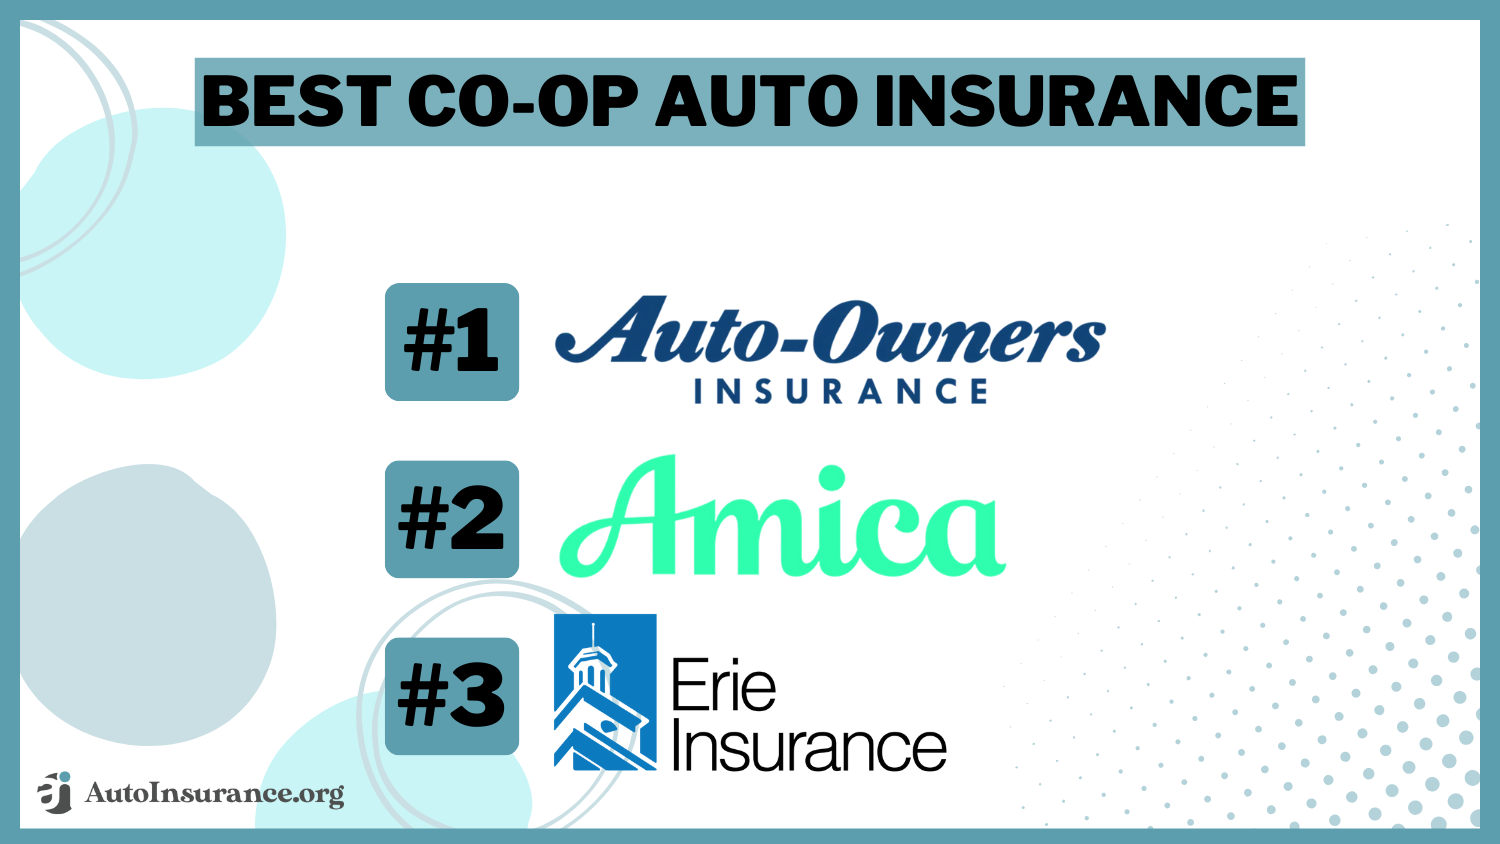 Best Co-Op Auto Insurance: Auto-Owners, Amica, and Erie